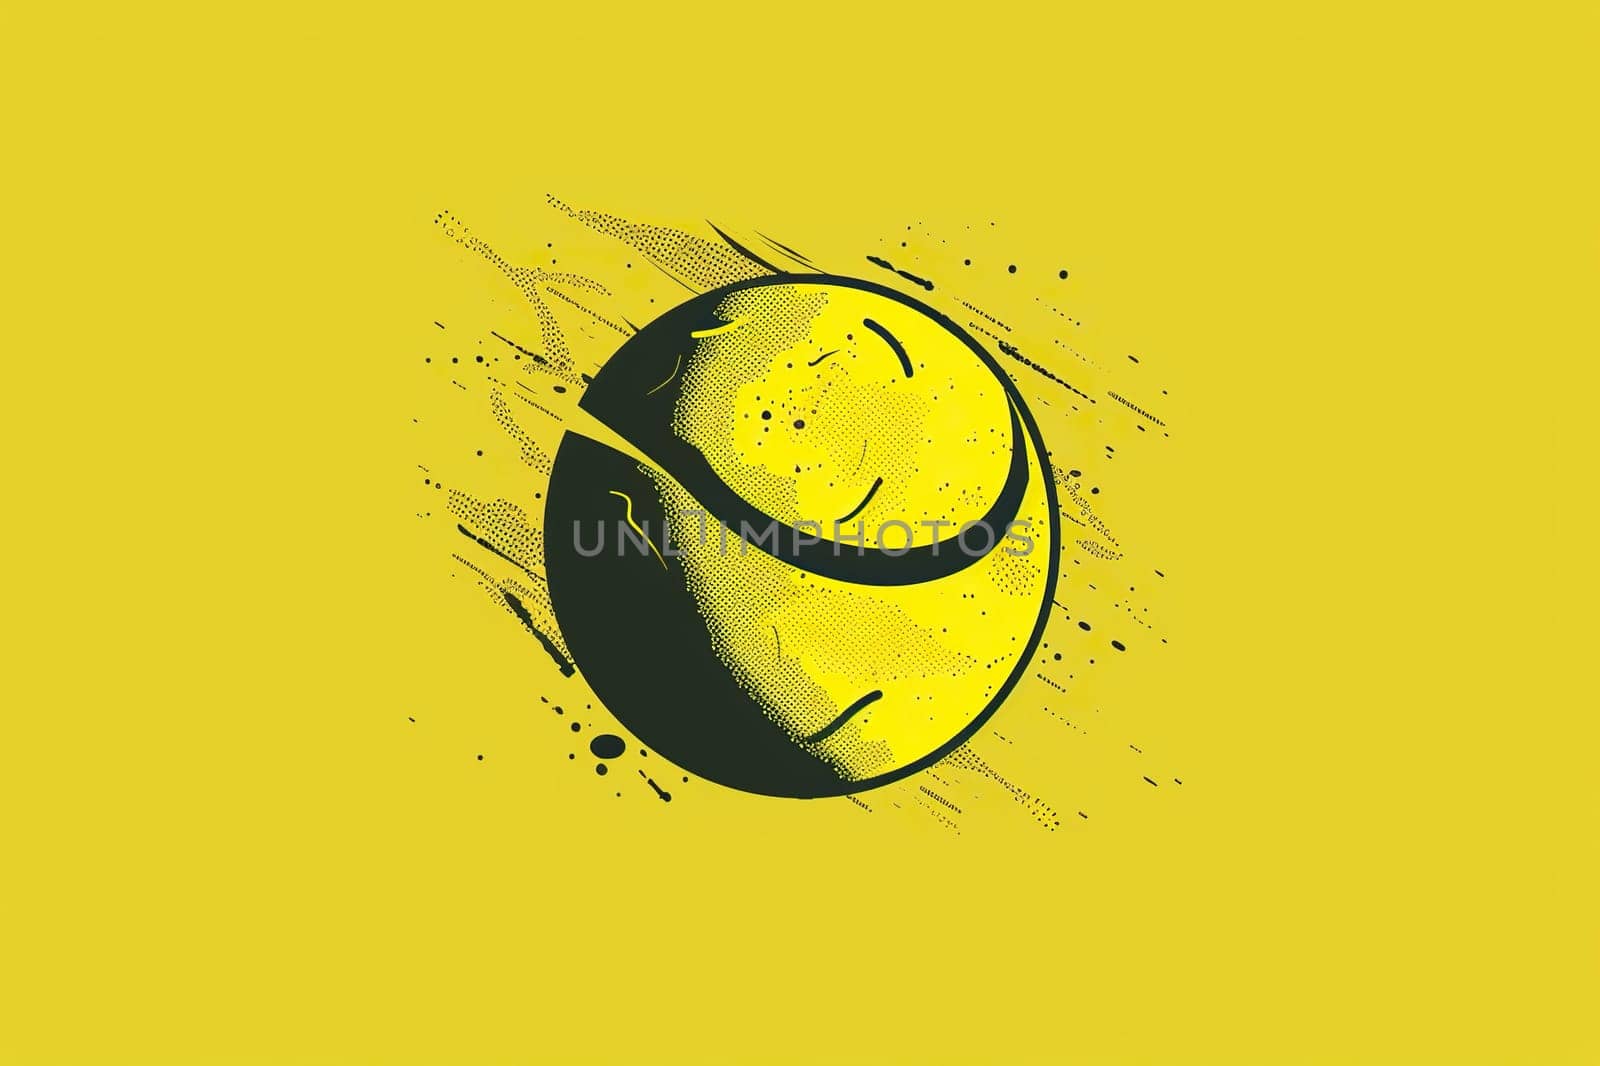 Tennis ball on a yellow background. Designer print for T-shirts, sweatshirts. Sports element for poster, banner, flyer.